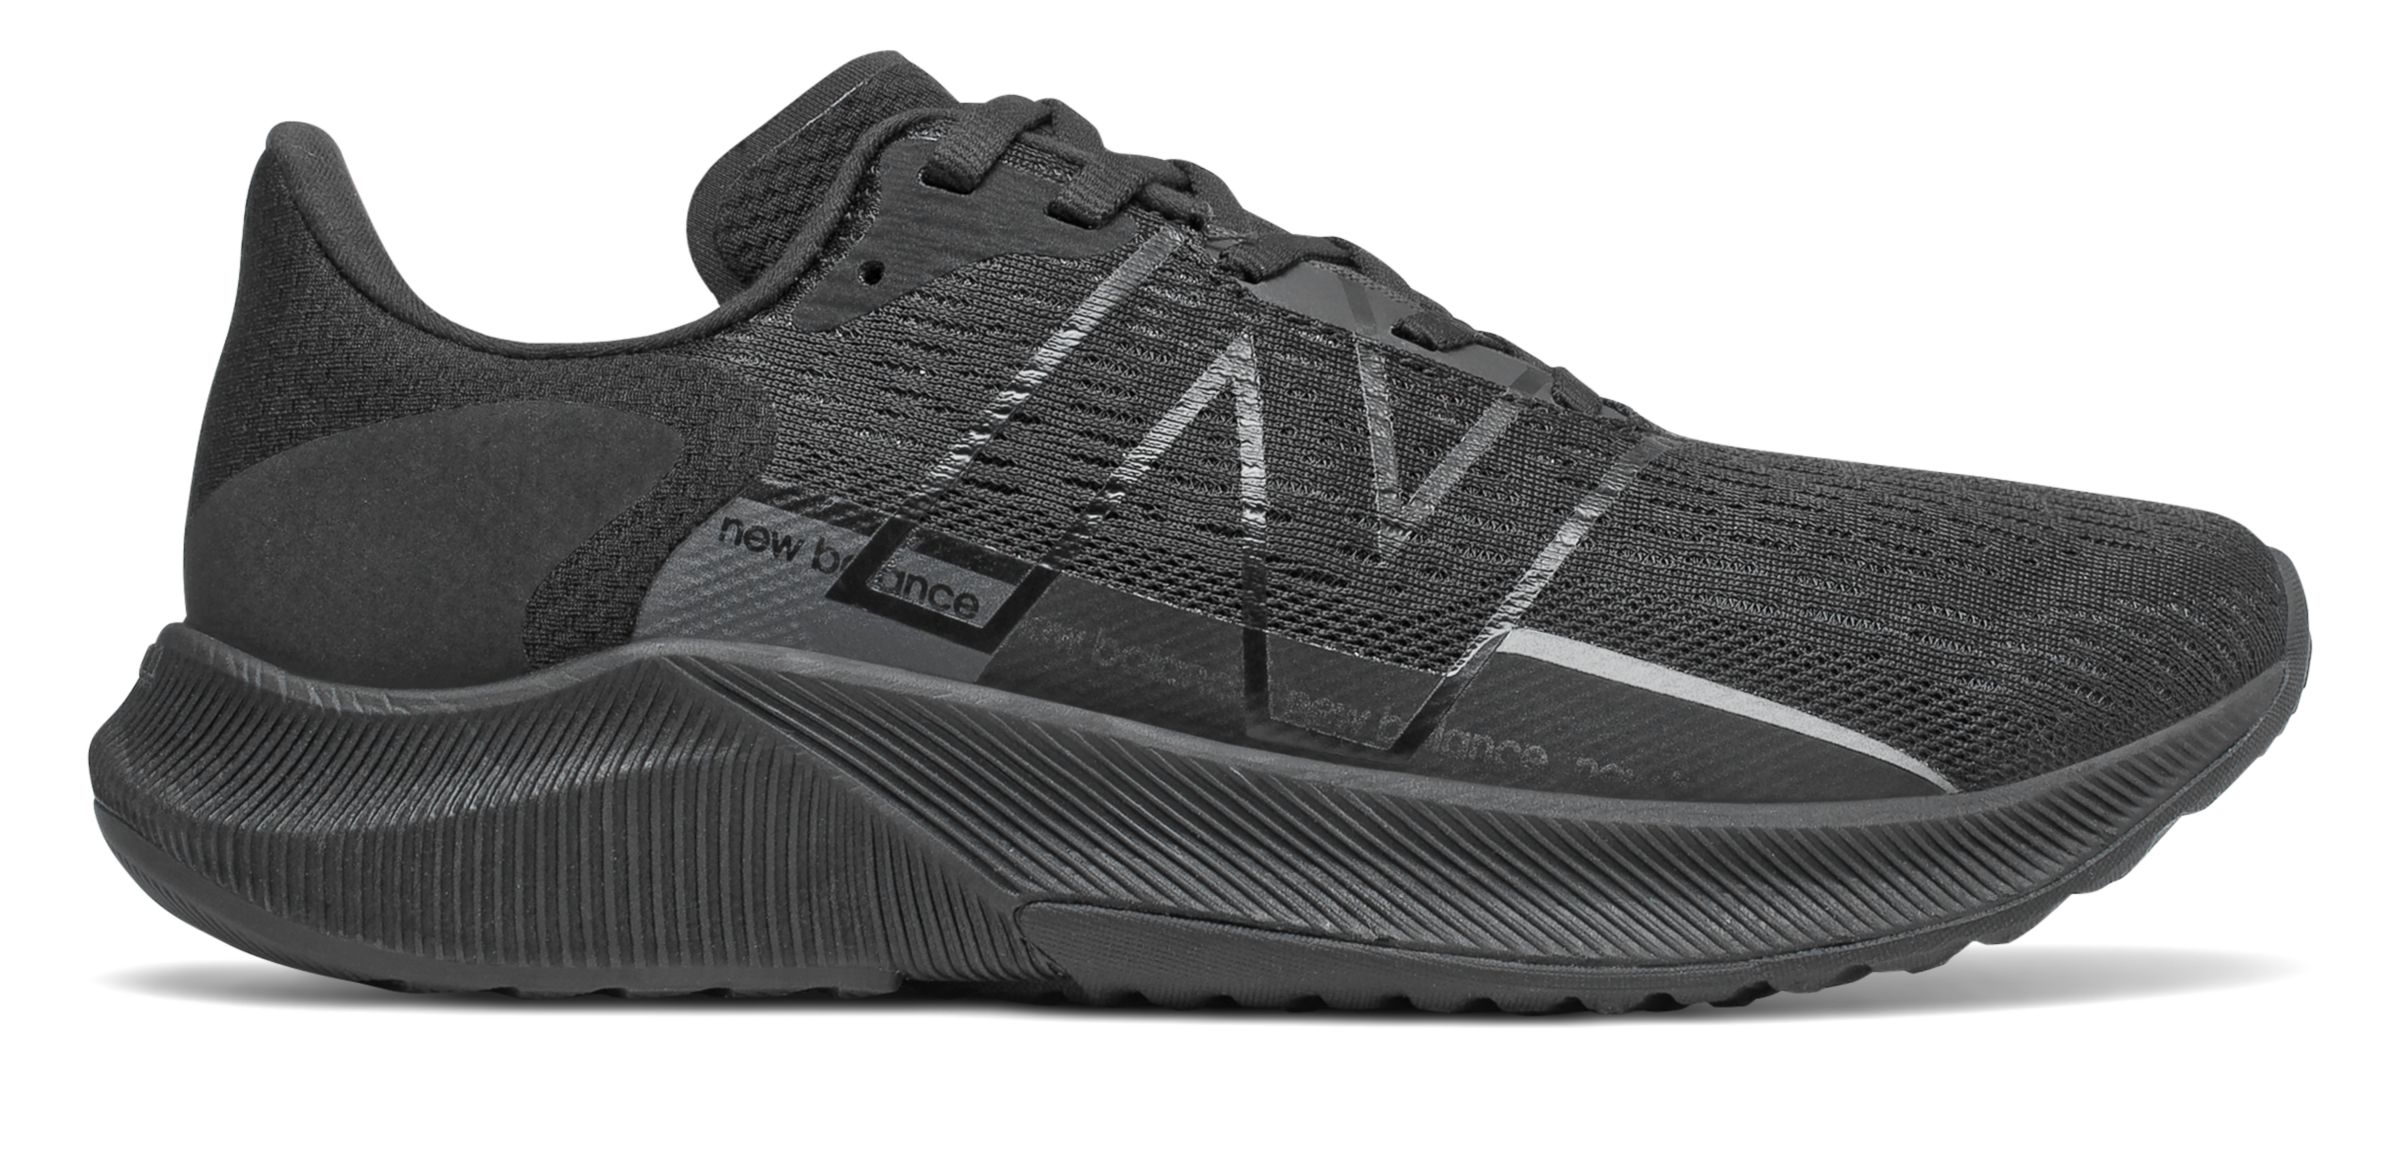 fuel cell propel new balance